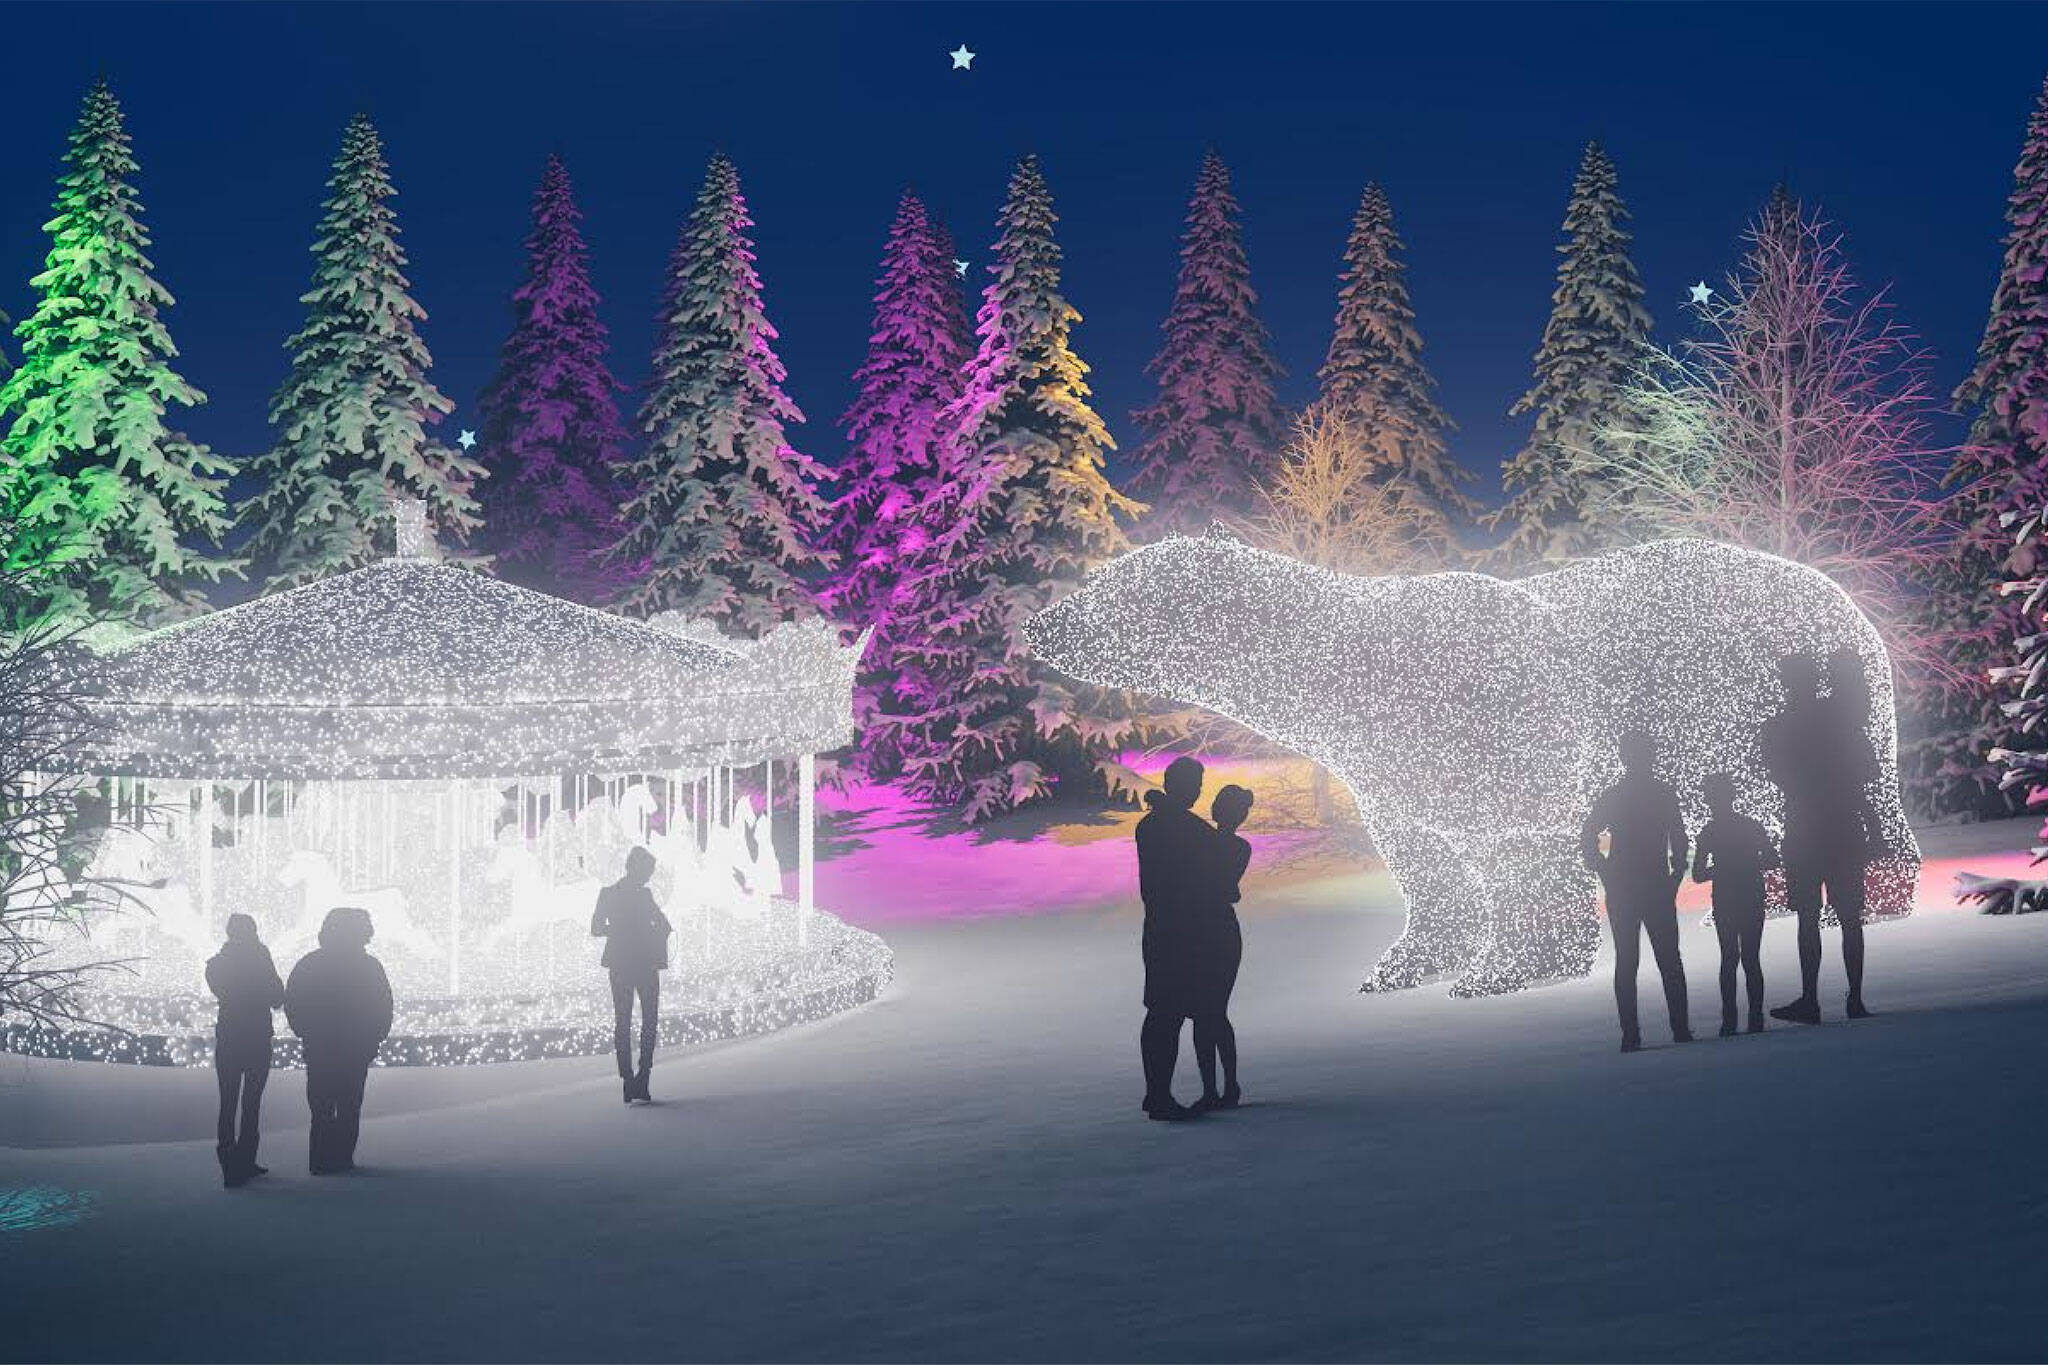 Toronto park transforming into winter wonderland with an ice tunnel and Christmas market